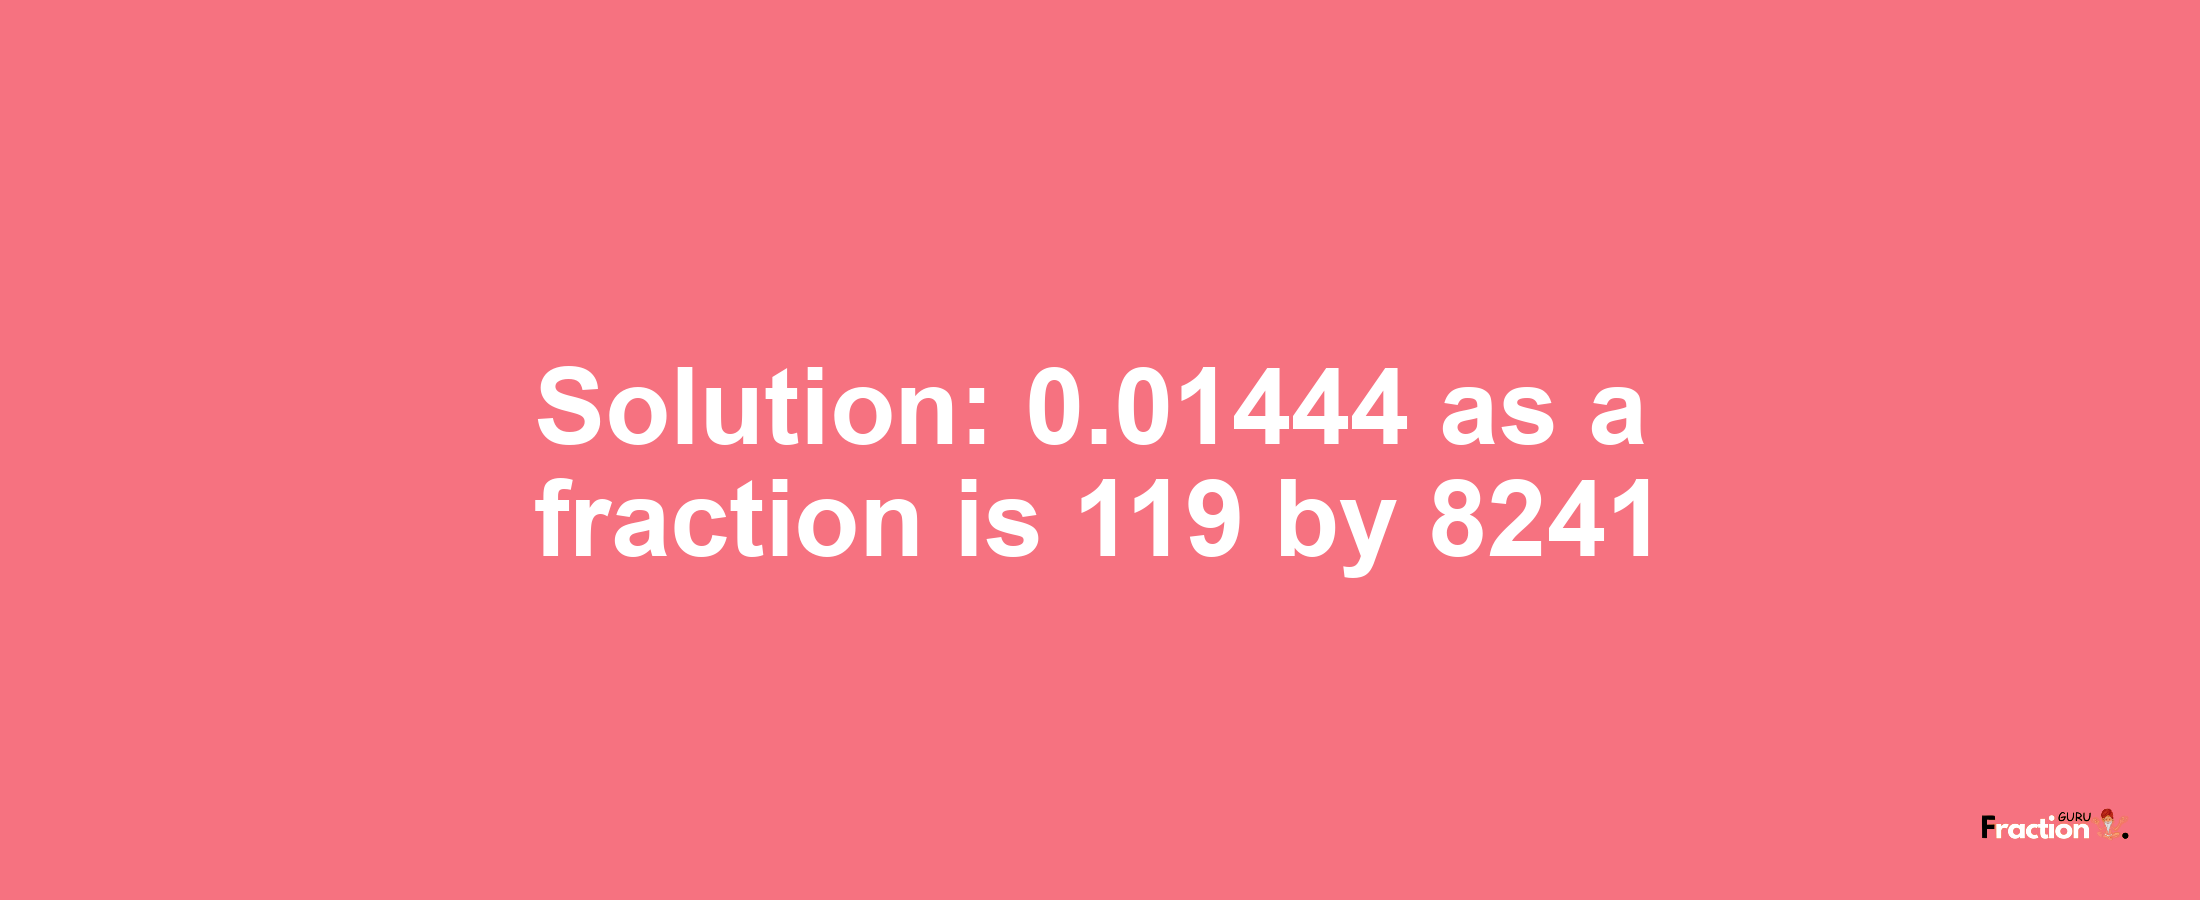 Solution:0.01444 as a fraction is 119/8241